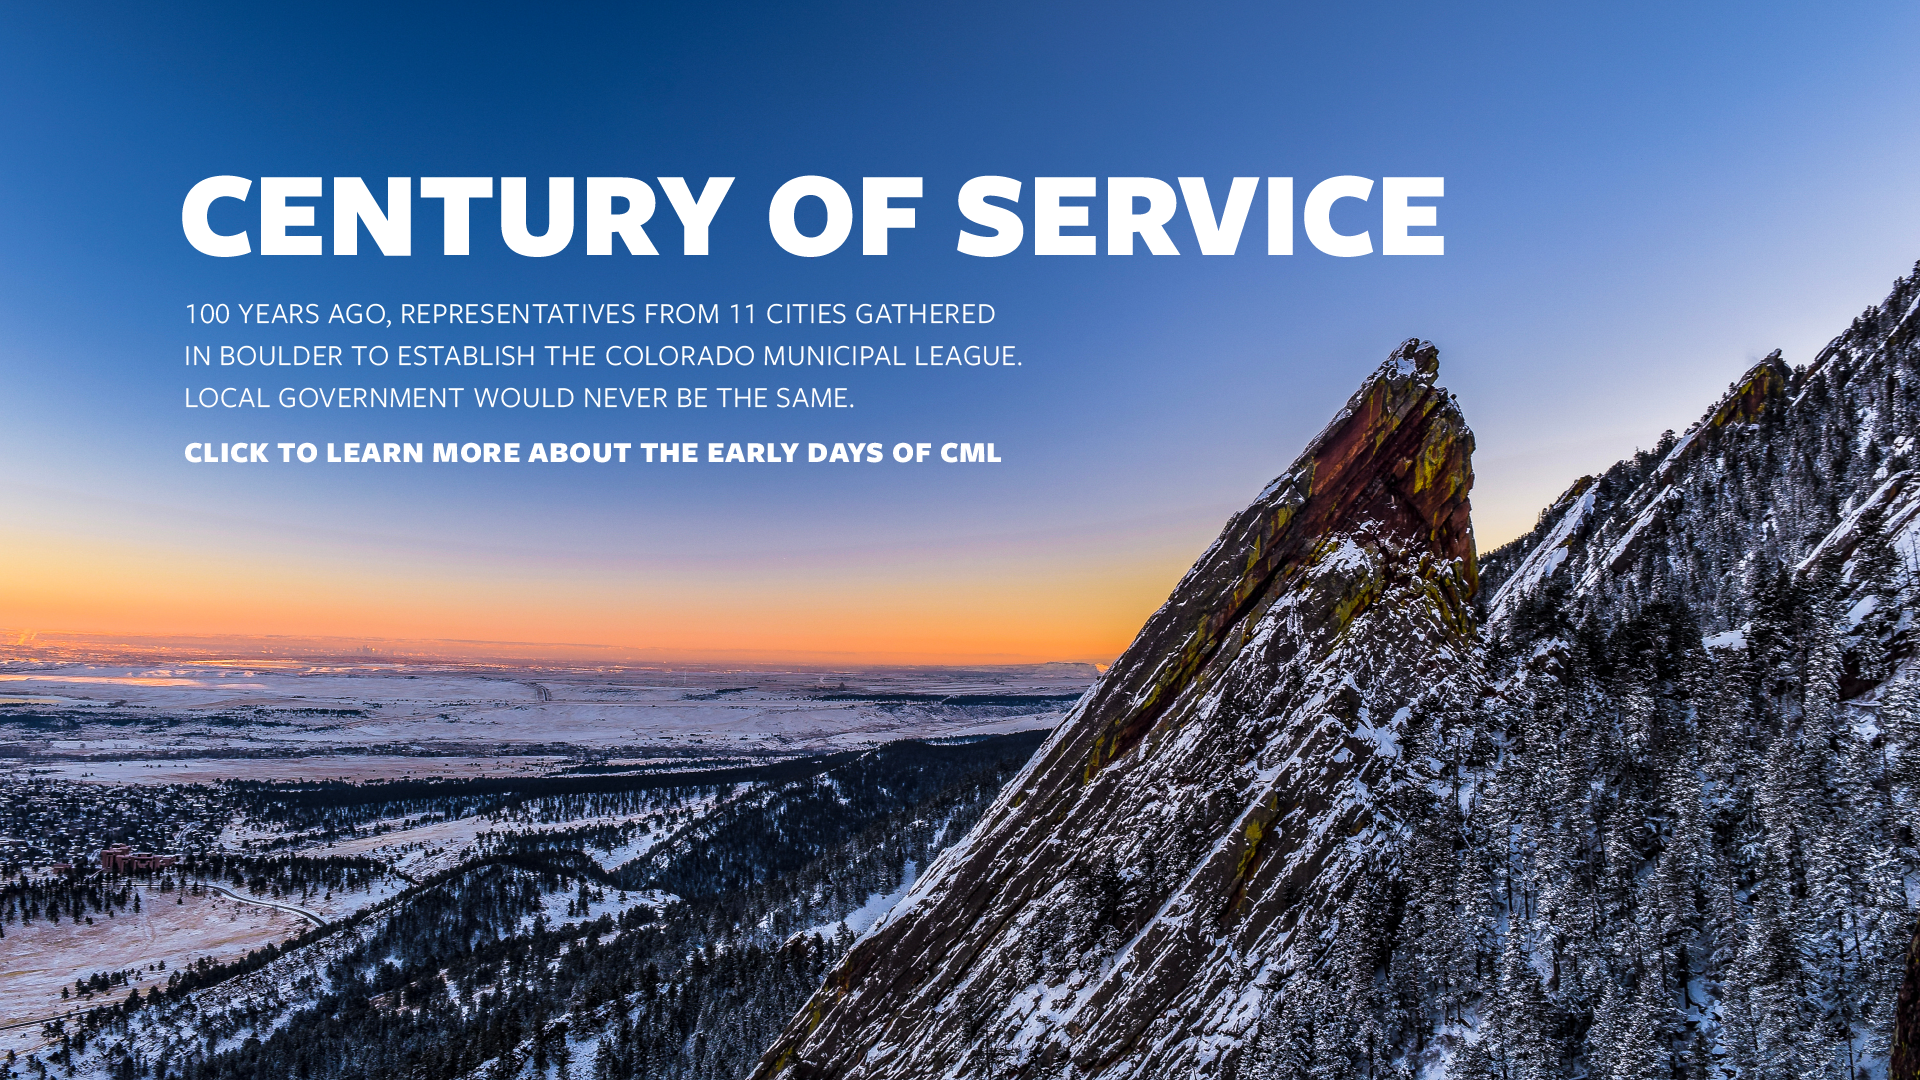 Century of Service - 100 years ago, representatives from 11 cities gathered in Boulder to establish the Colorado Municipal League. Local government would never be the same. Click to learn more about the early days of CML.